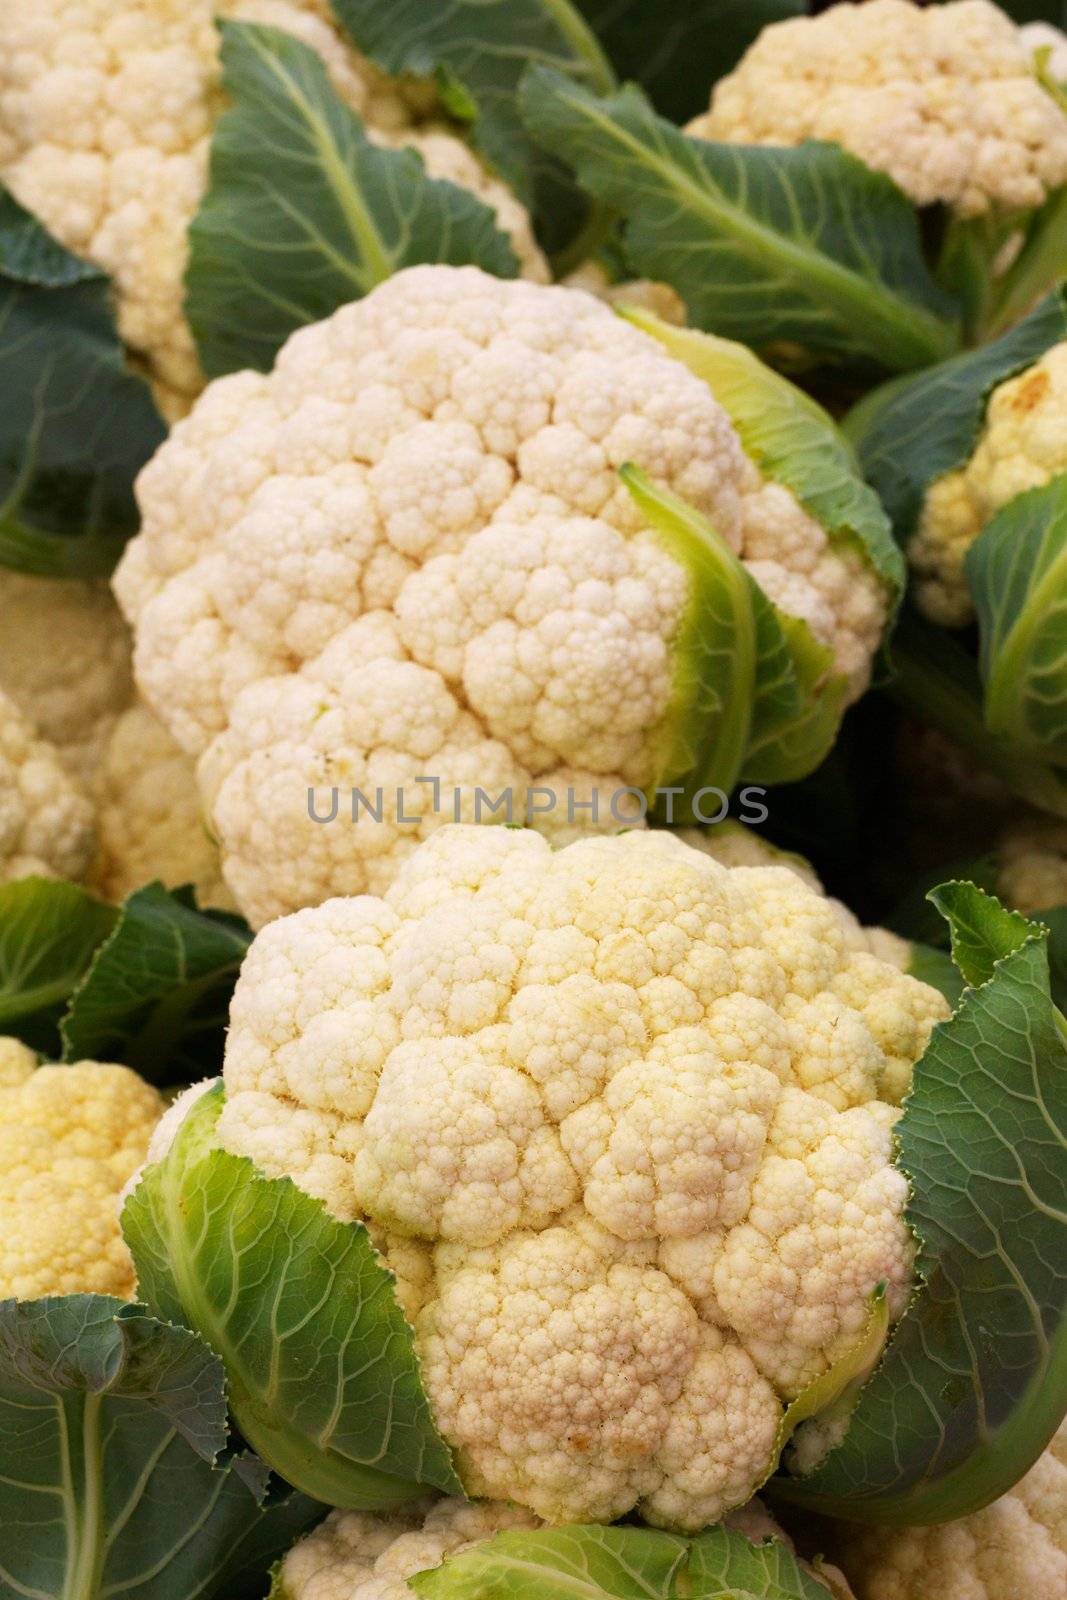 Pile of Cauliflower at the farmers market